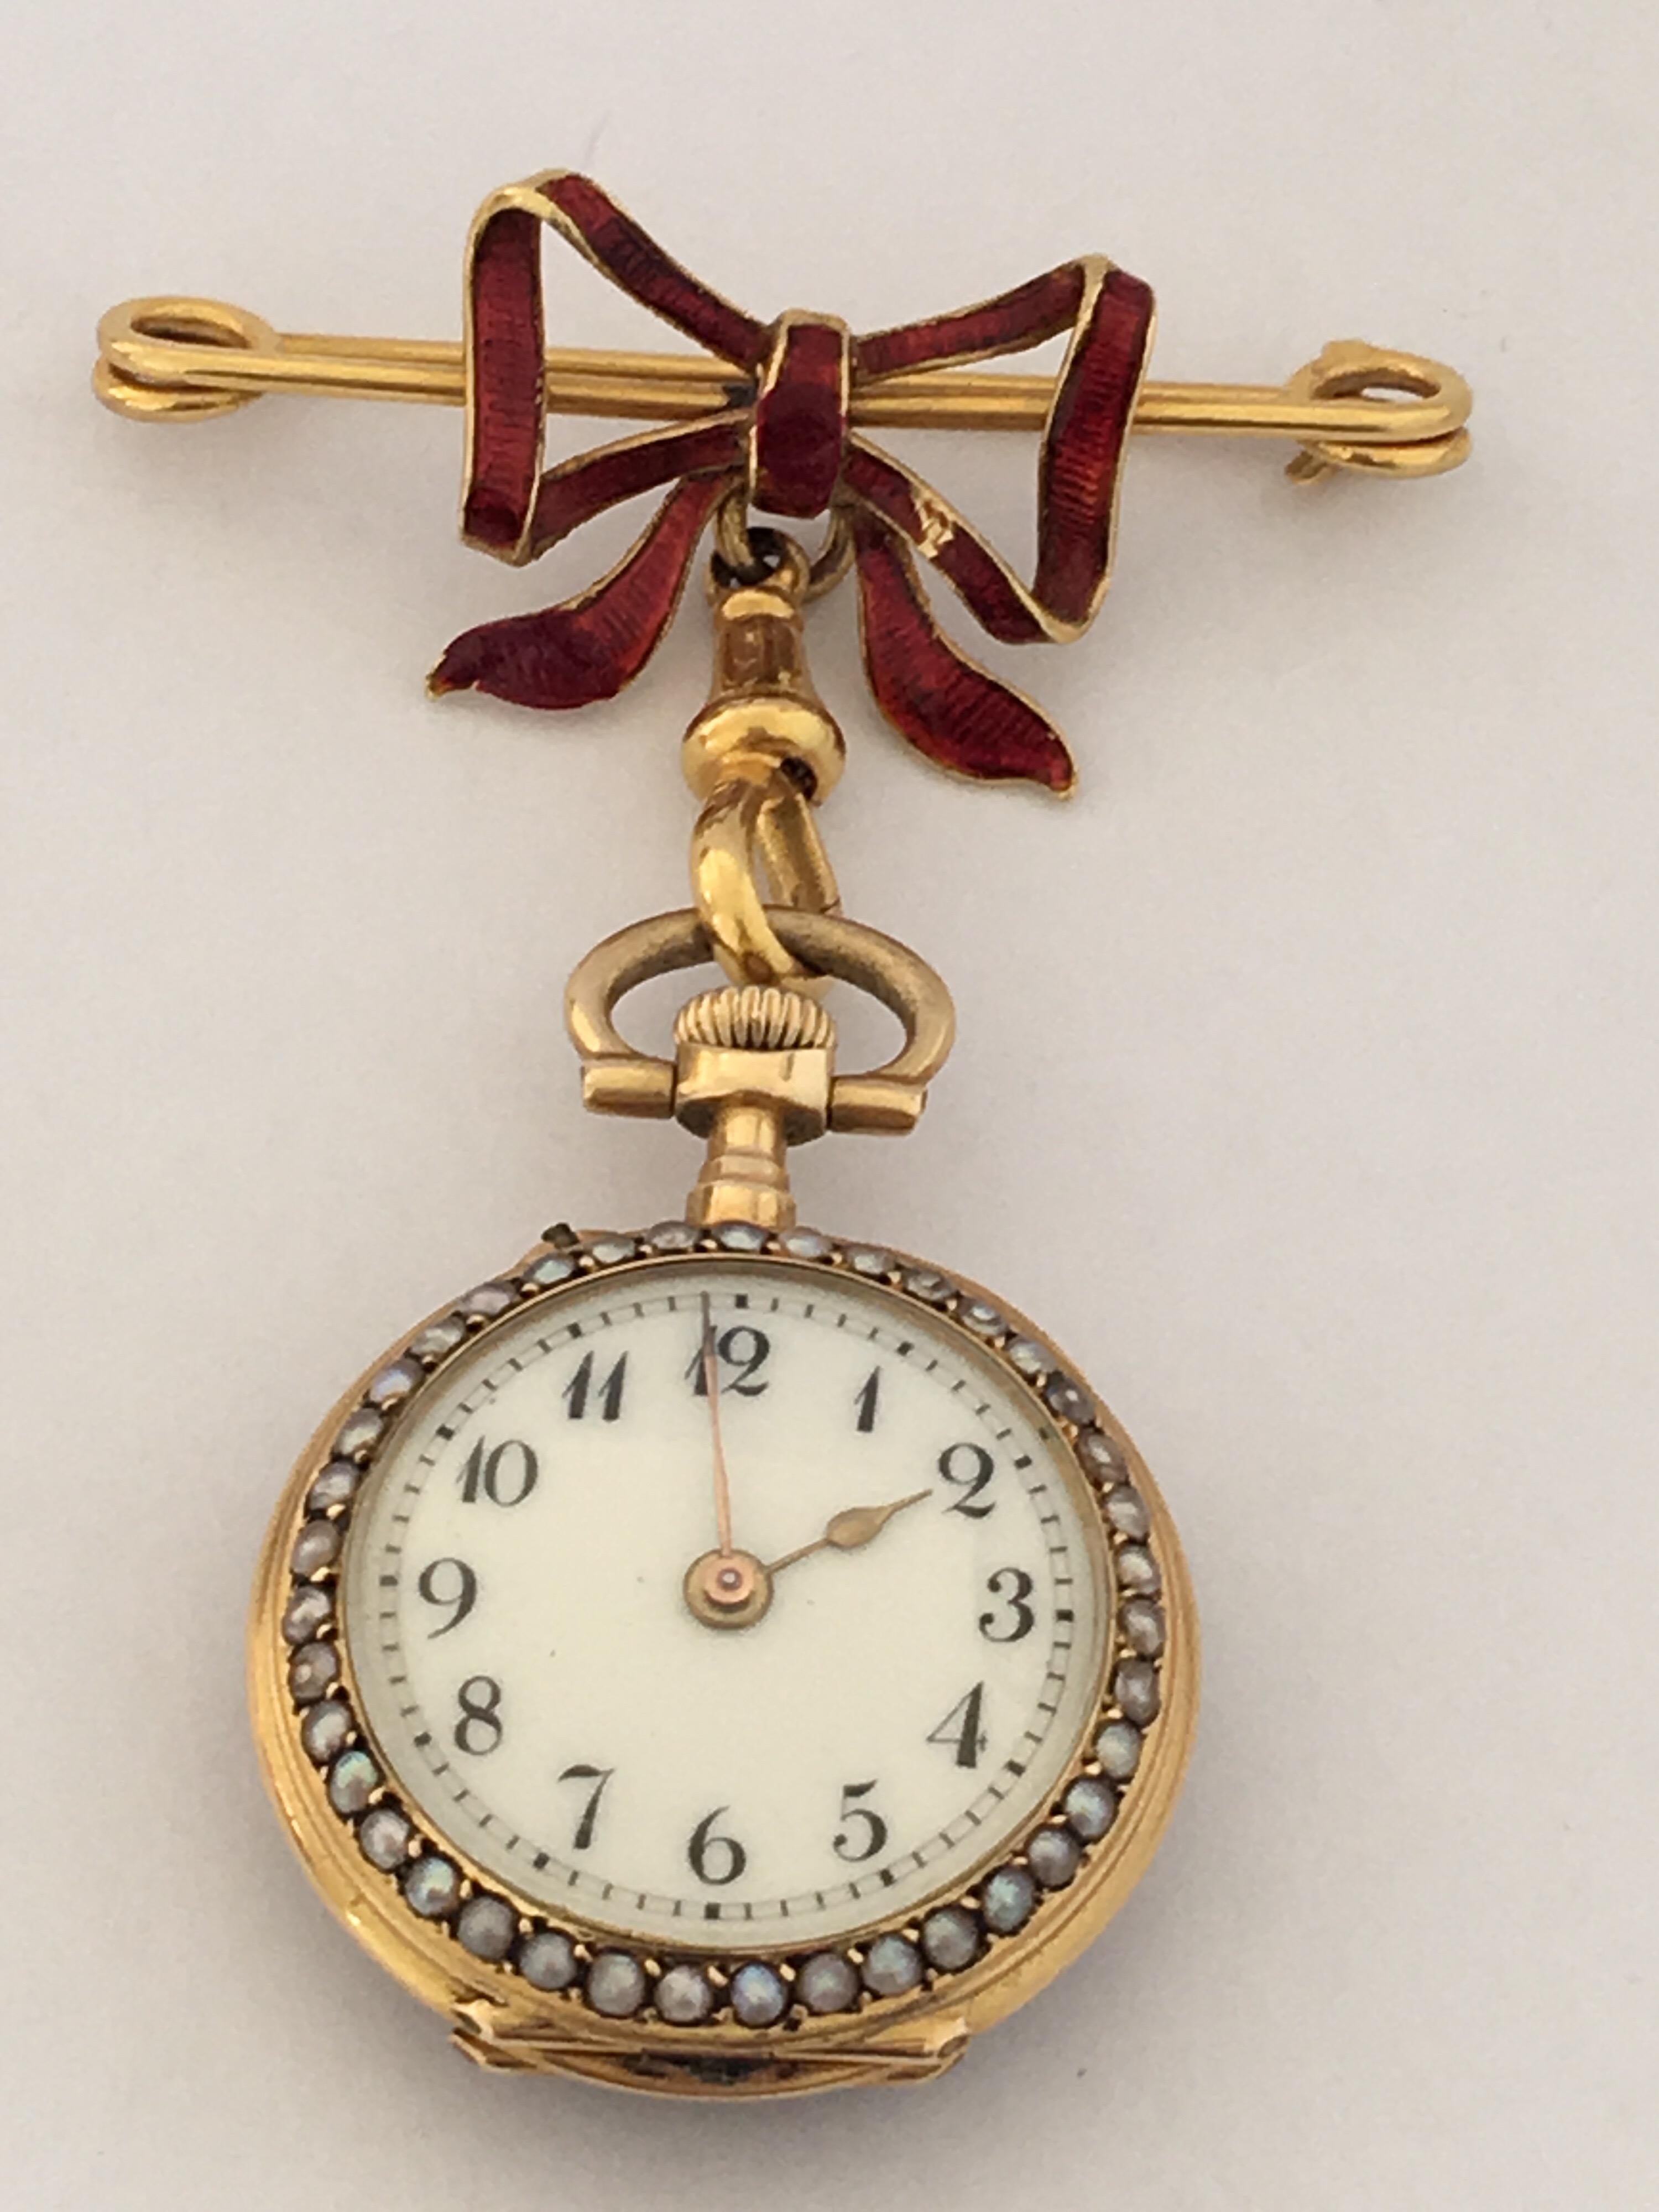 
This beautiful Victorian period Ladies Brooch Fob watch is in good working condition. And ticking nicely. the enamel on the bow has visible chipped and very fine scratches on the enamel top cover case as worn by aged.